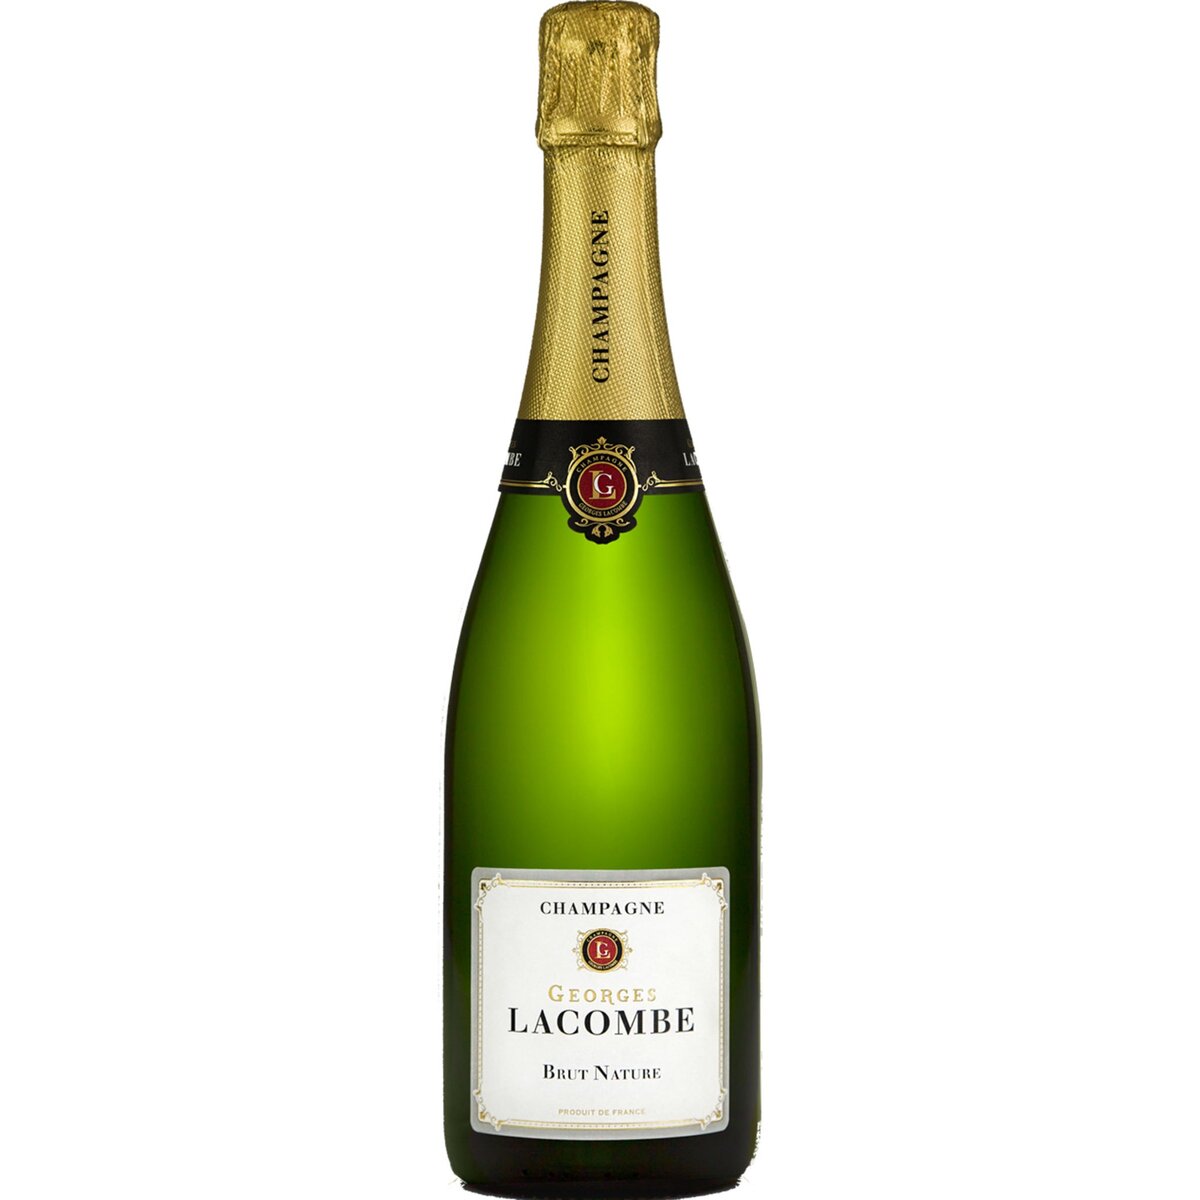 GEORGES LACOMBE AOP Champagne brut nature 75cl